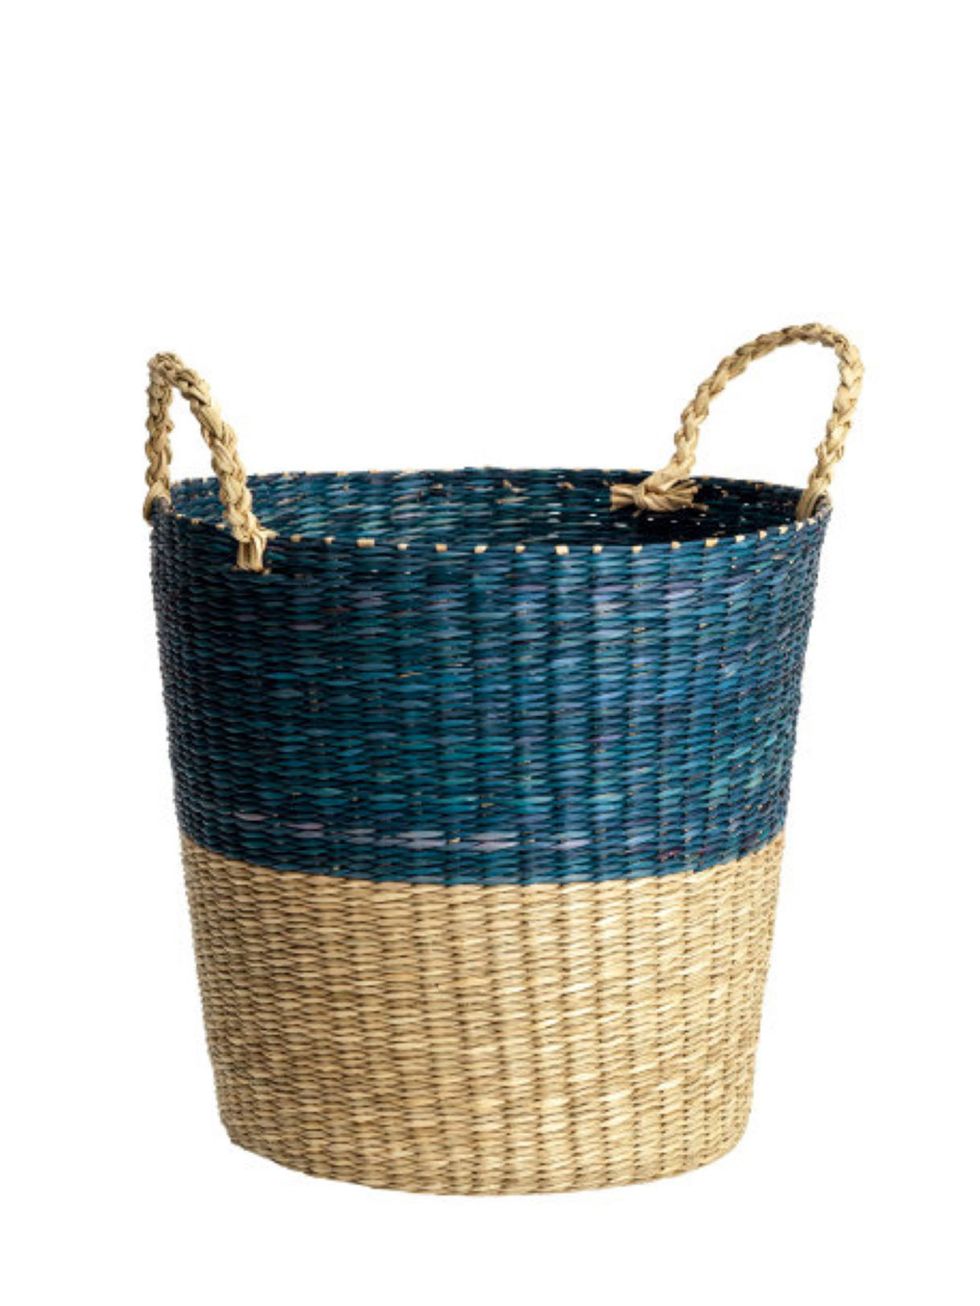 Basket, Wicker, Storage basket, Teal, Azure, Turquoise, Home accessories, Aqua, Laundry basket, Bicycle accessory, 